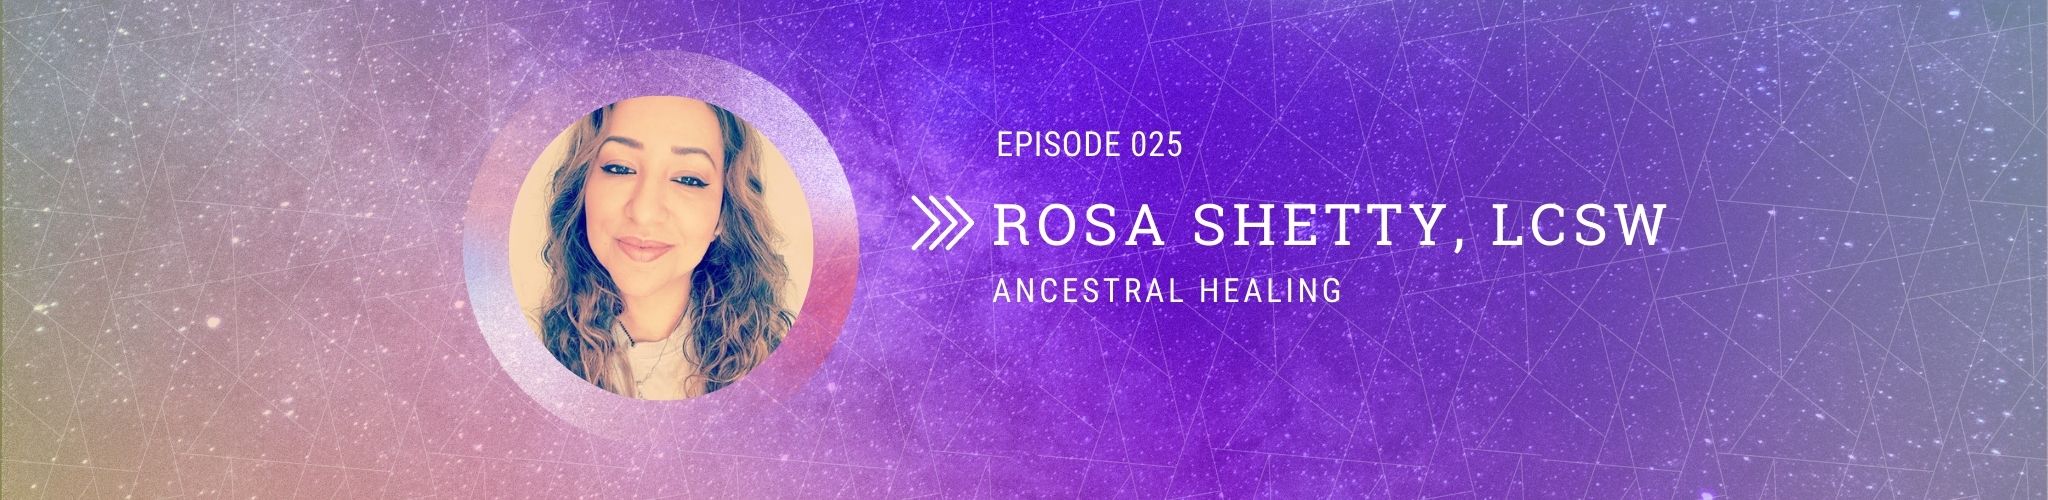 podcast banner art featuring Rosa Shetty